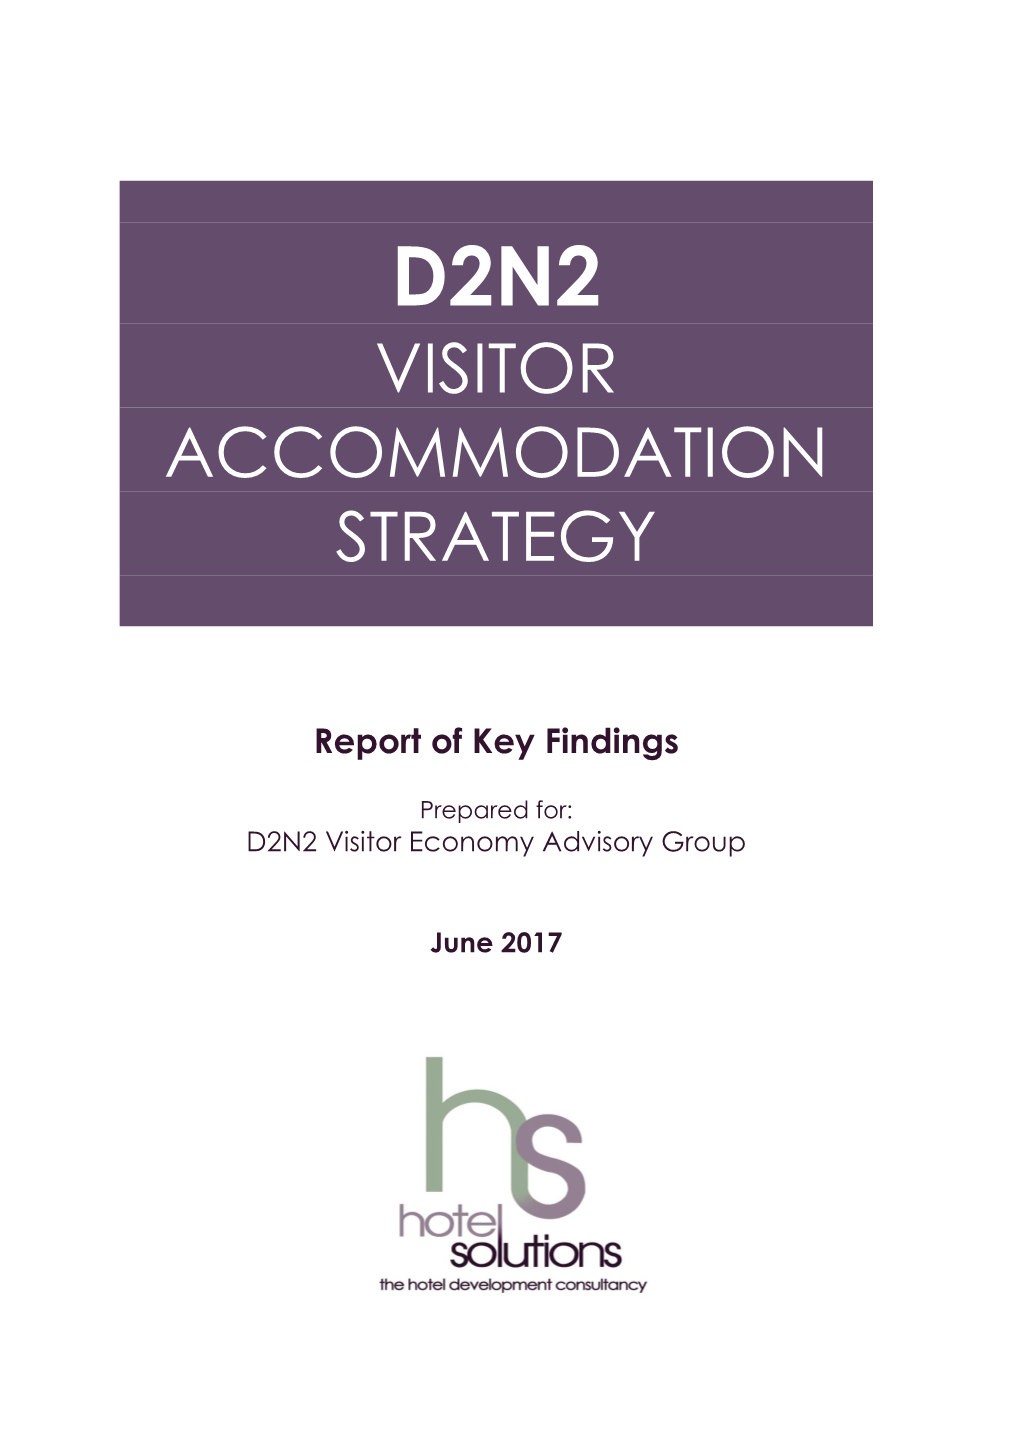 D2n2 Visitor Accommodation Strategy